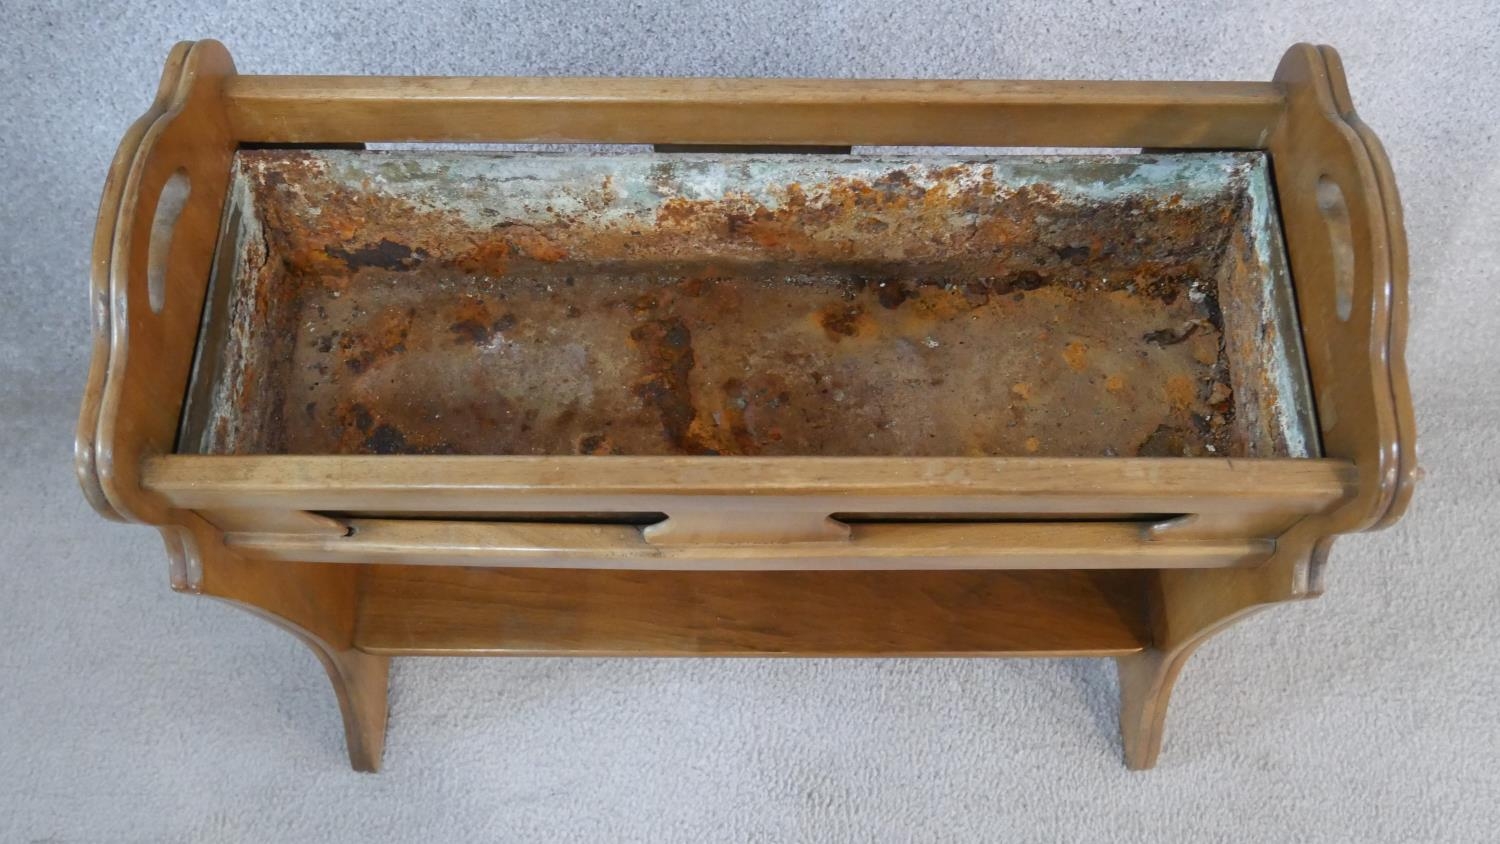 A late 19th century walnut plant trough stand with fitted zinc liner. H.55.5 L.58 W.26cm - Image 3 of 3